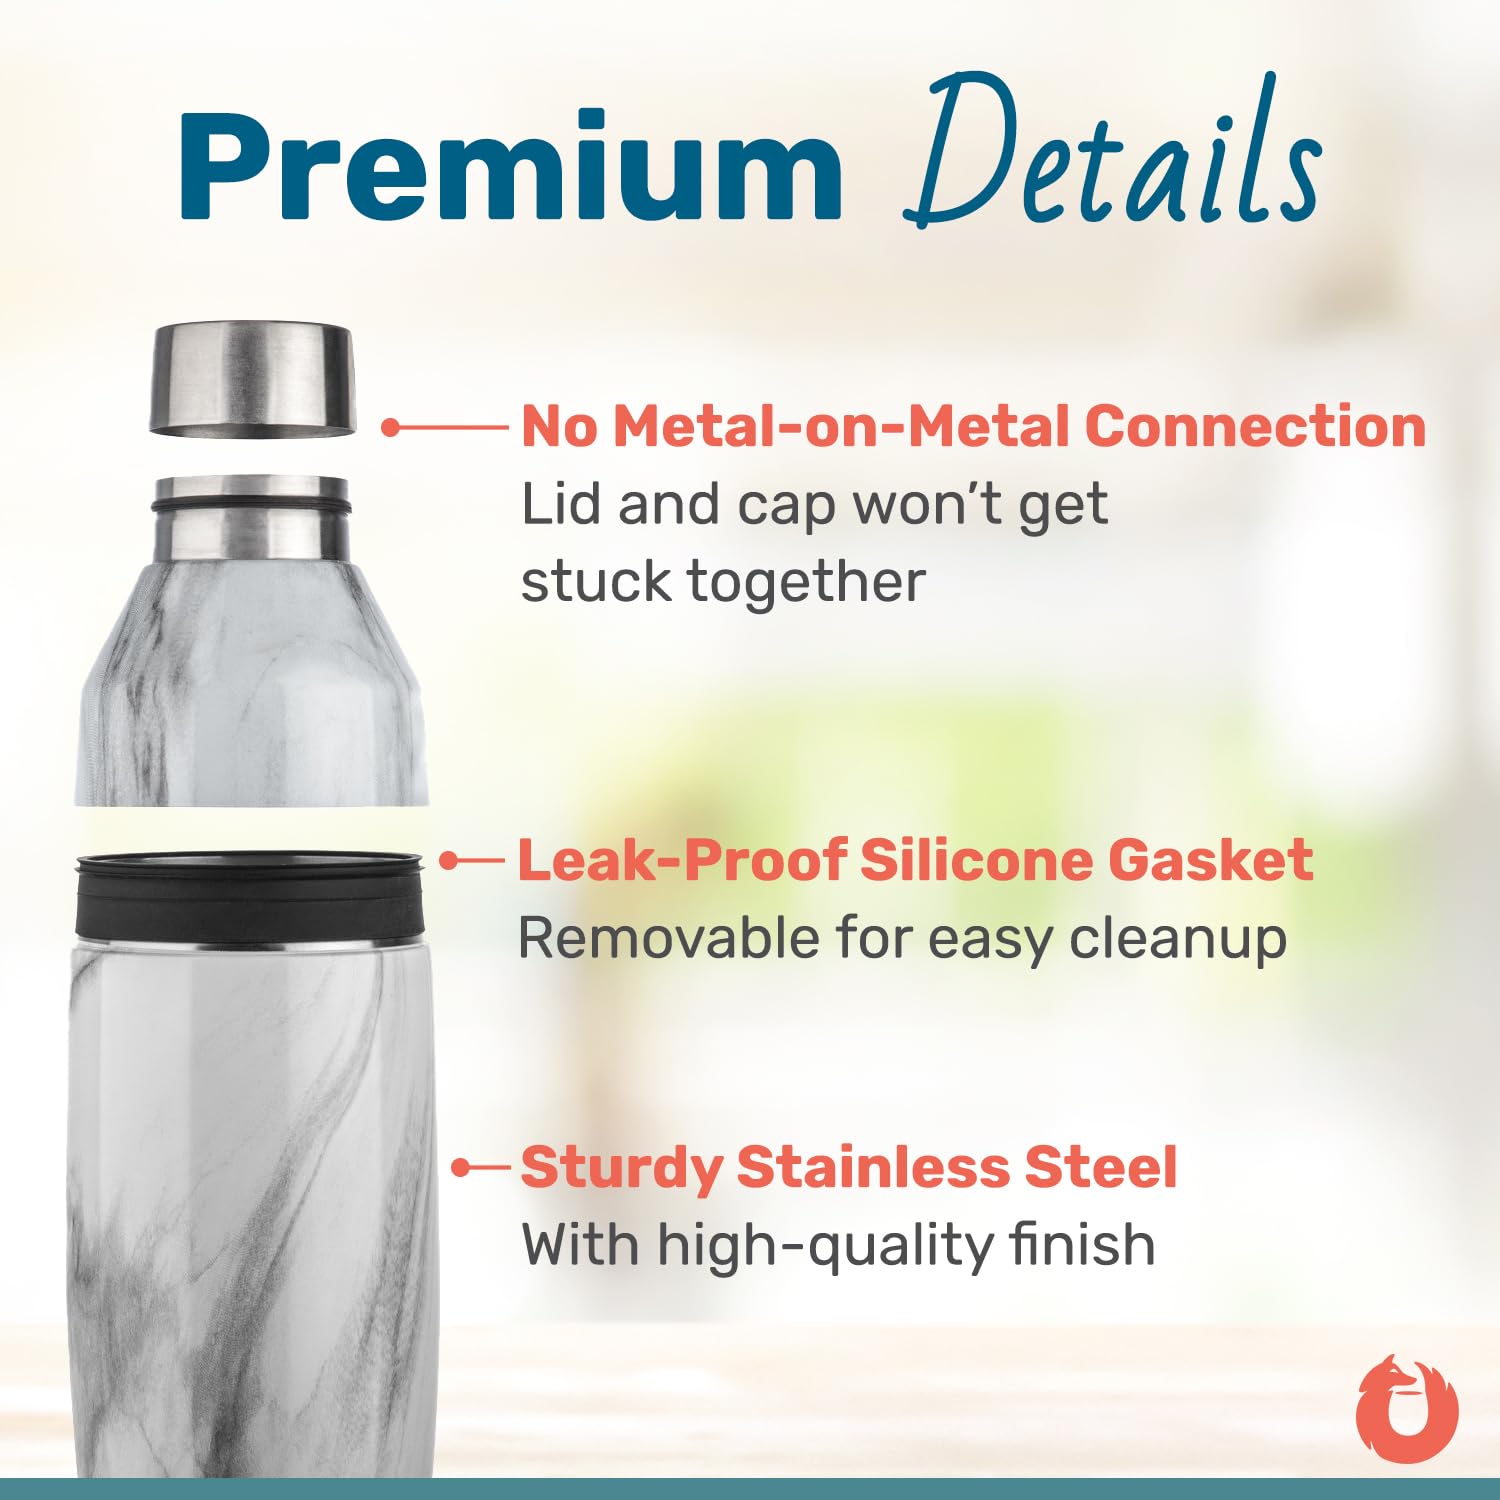 SNOWFOX C90024-01 Premium Vacuum Insulated Stainless Steel Cocktail Shaker - Home Bar Accessories - Elegant Drink Mixer - Leak-Proof Lid With Jigger & Built-In Strainer - 22oz.